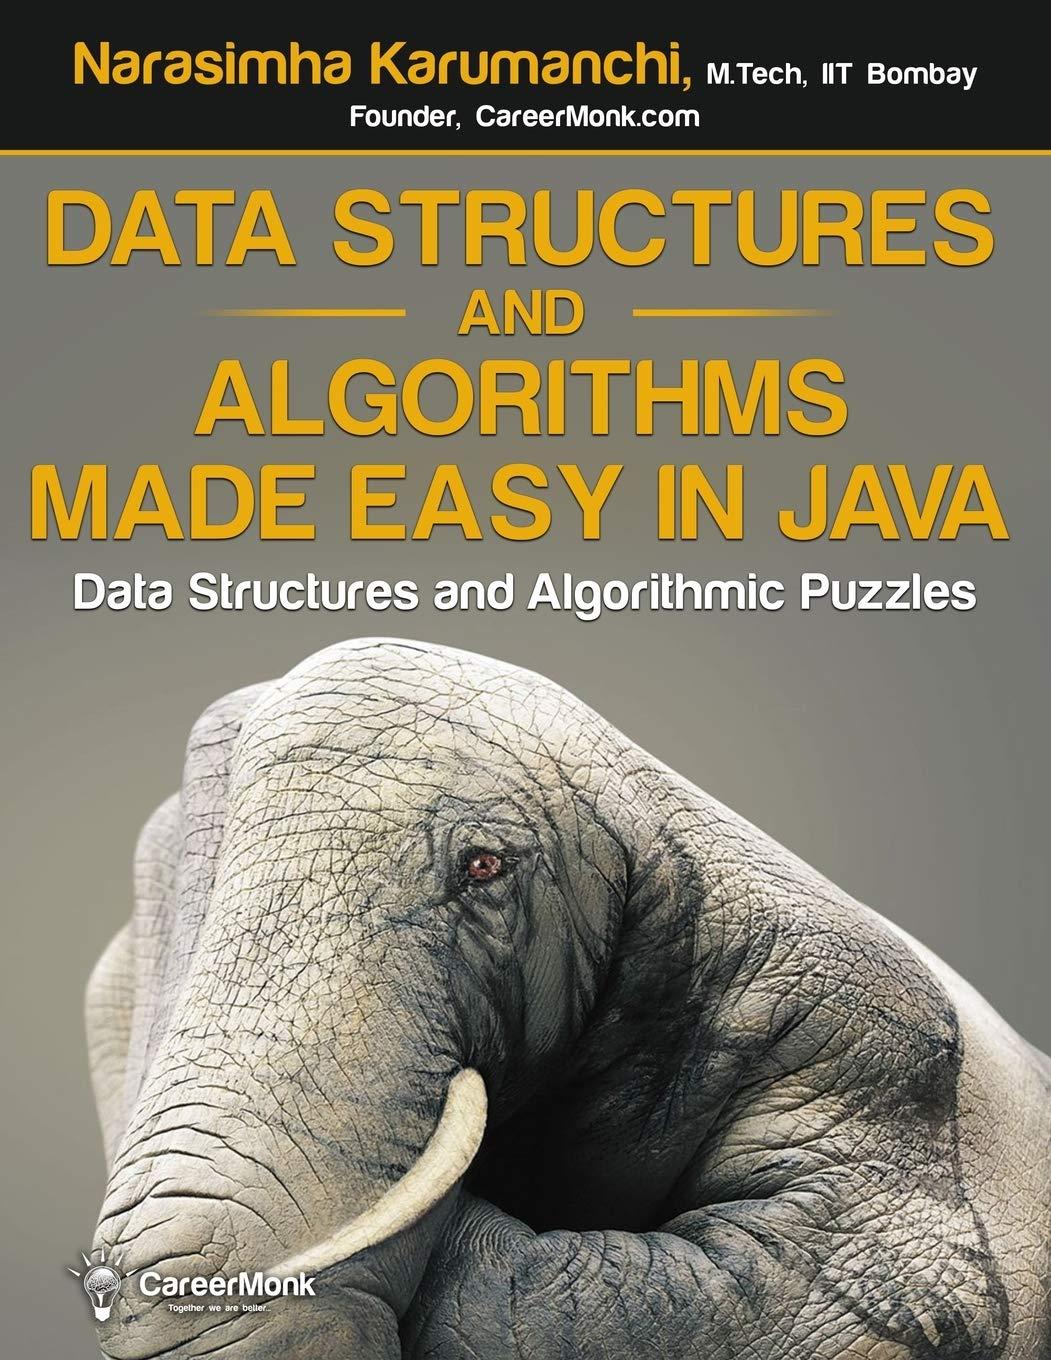 data structures and algorithms made easy in java data structure and algorithmic puzzles 2nd edition narasimha